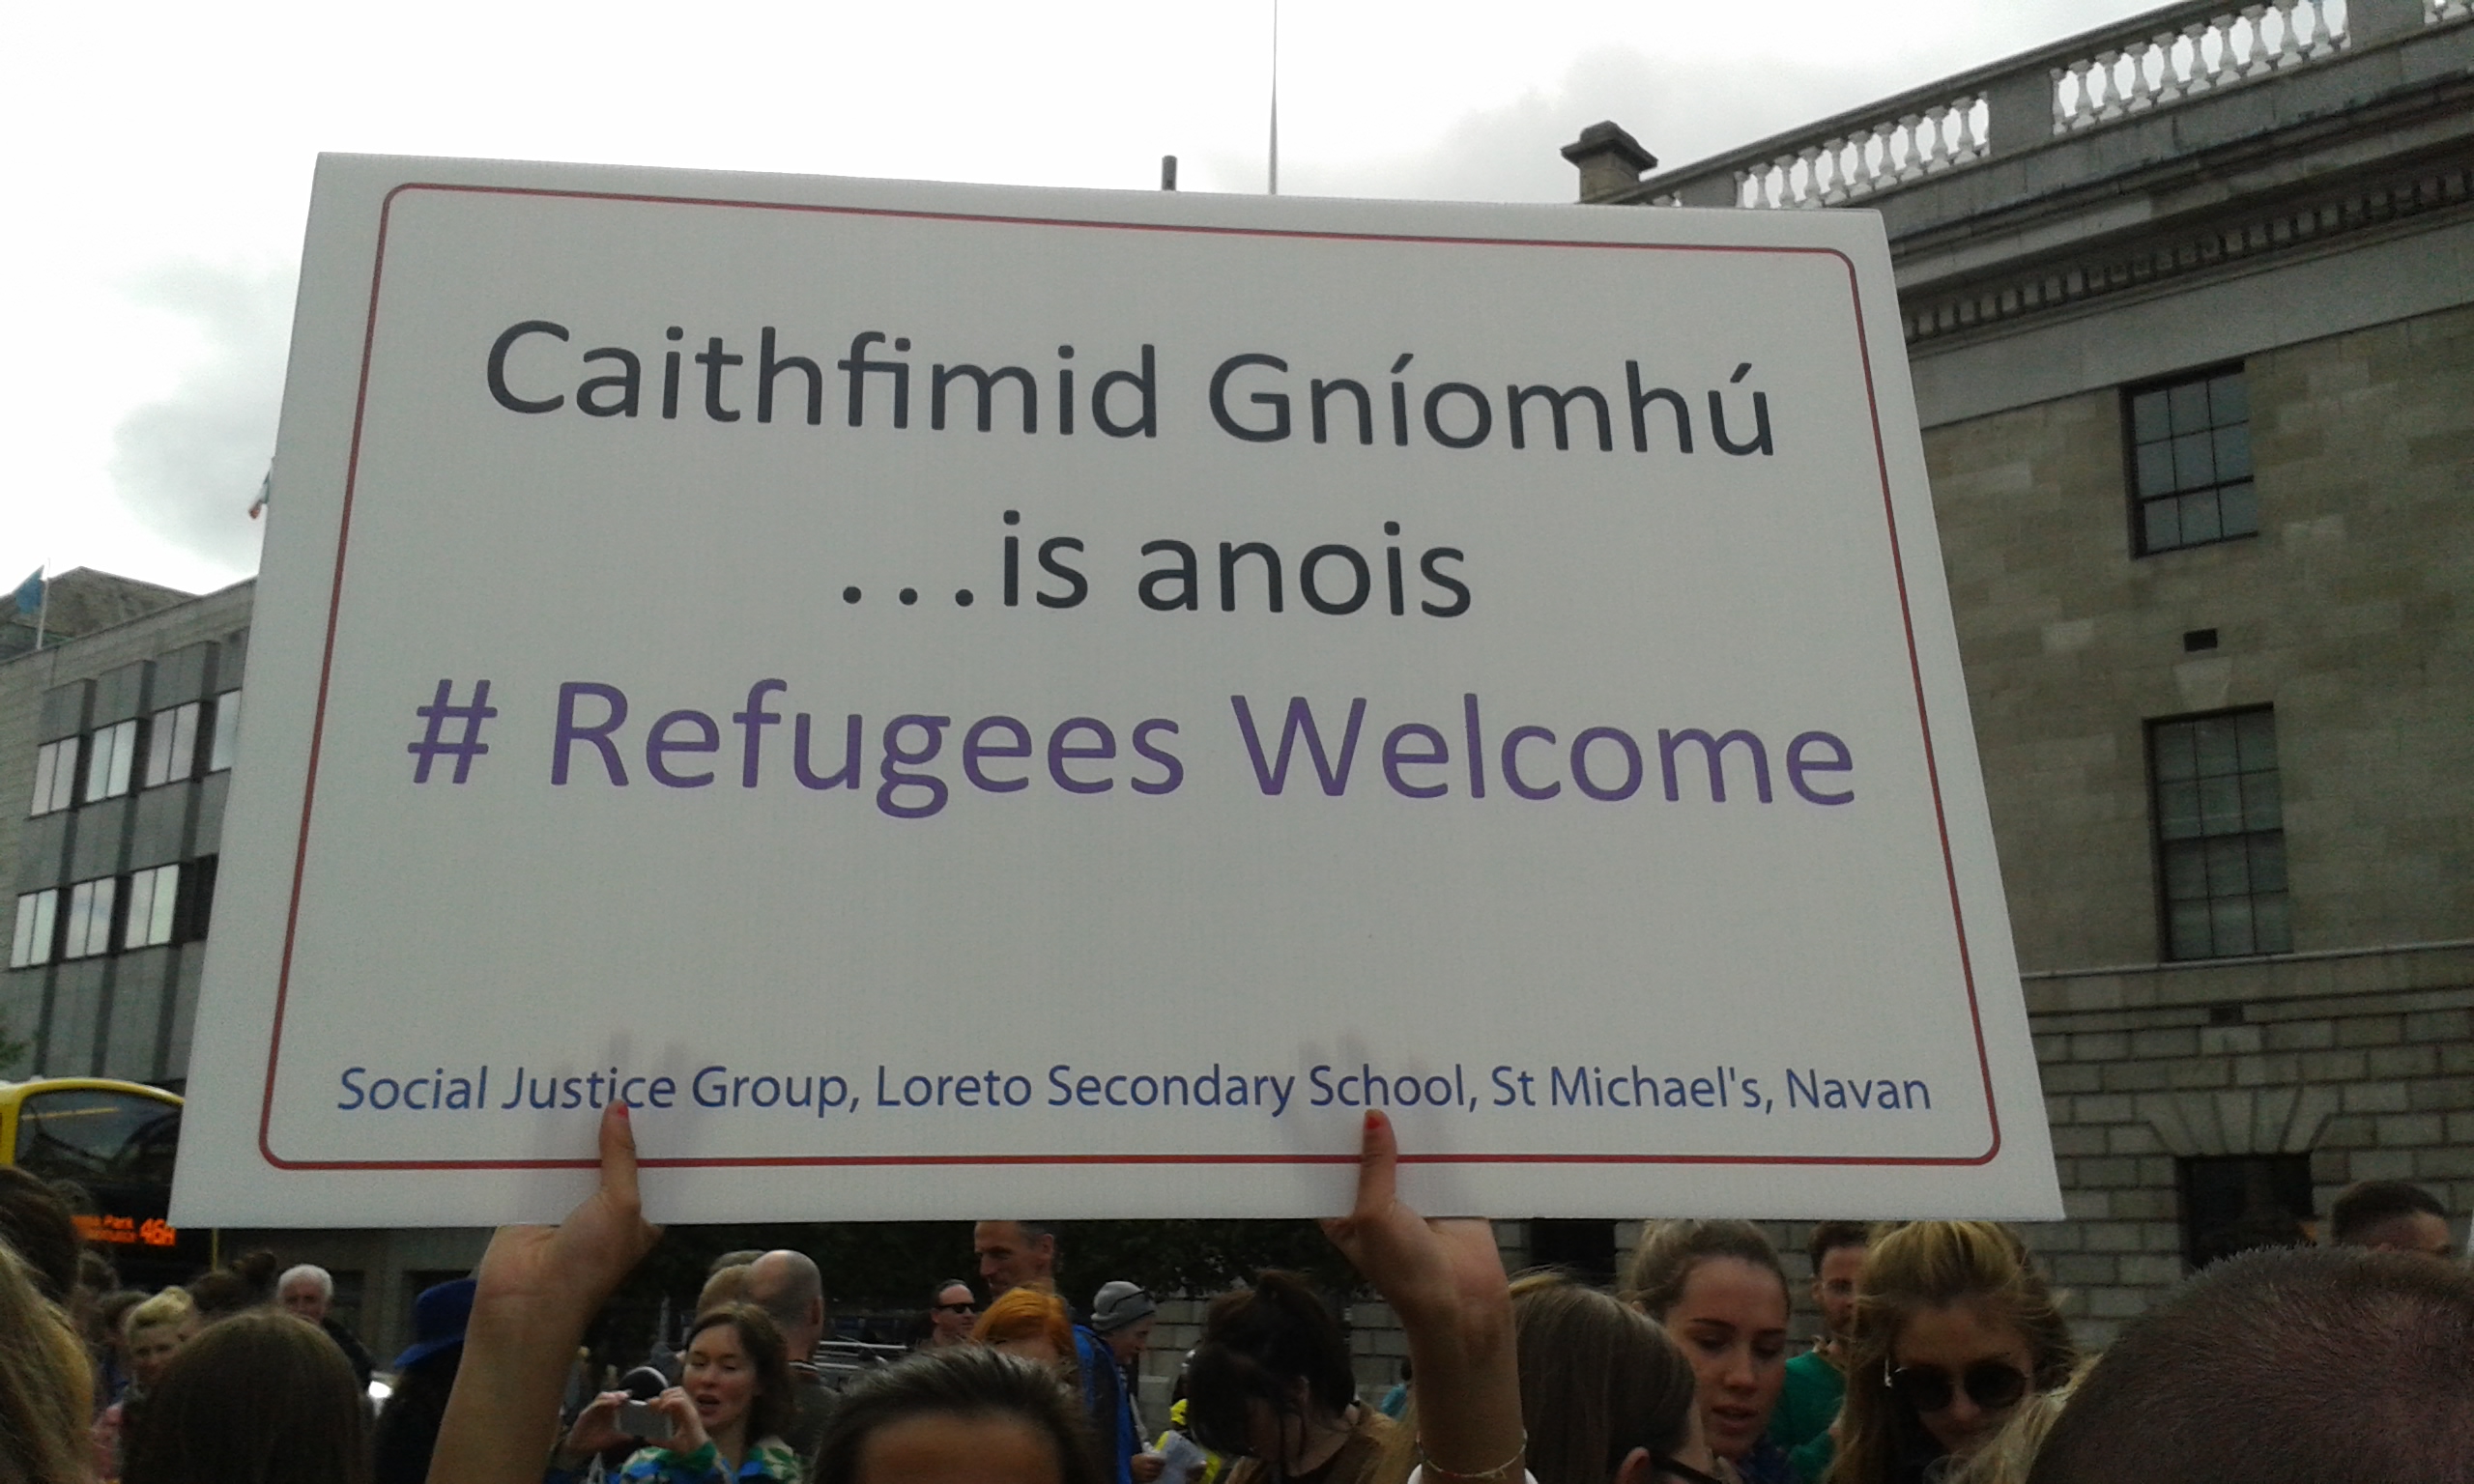 Refugees Welcome sign by  Social Justice Group, Loreto Secondary School from St Michael's Navan at solidarity rally to welcome refugees in Dublin (Sept 12th, 2015). Photo: Grace McManus)